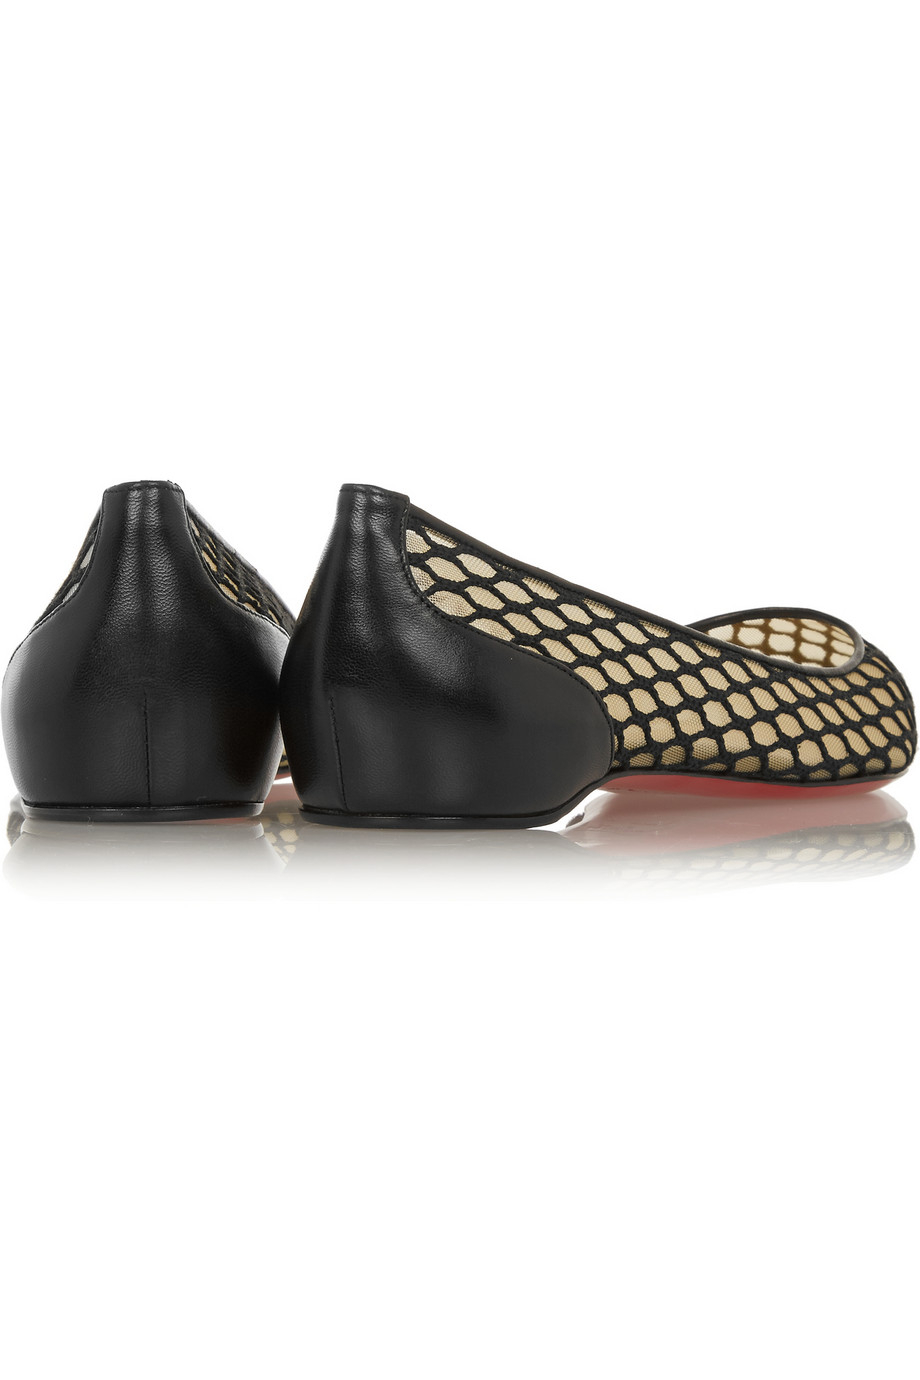 louis vuitton red bottom pumps - christian louboutin Pigaresille pointed-toe flats | The Filipino ...